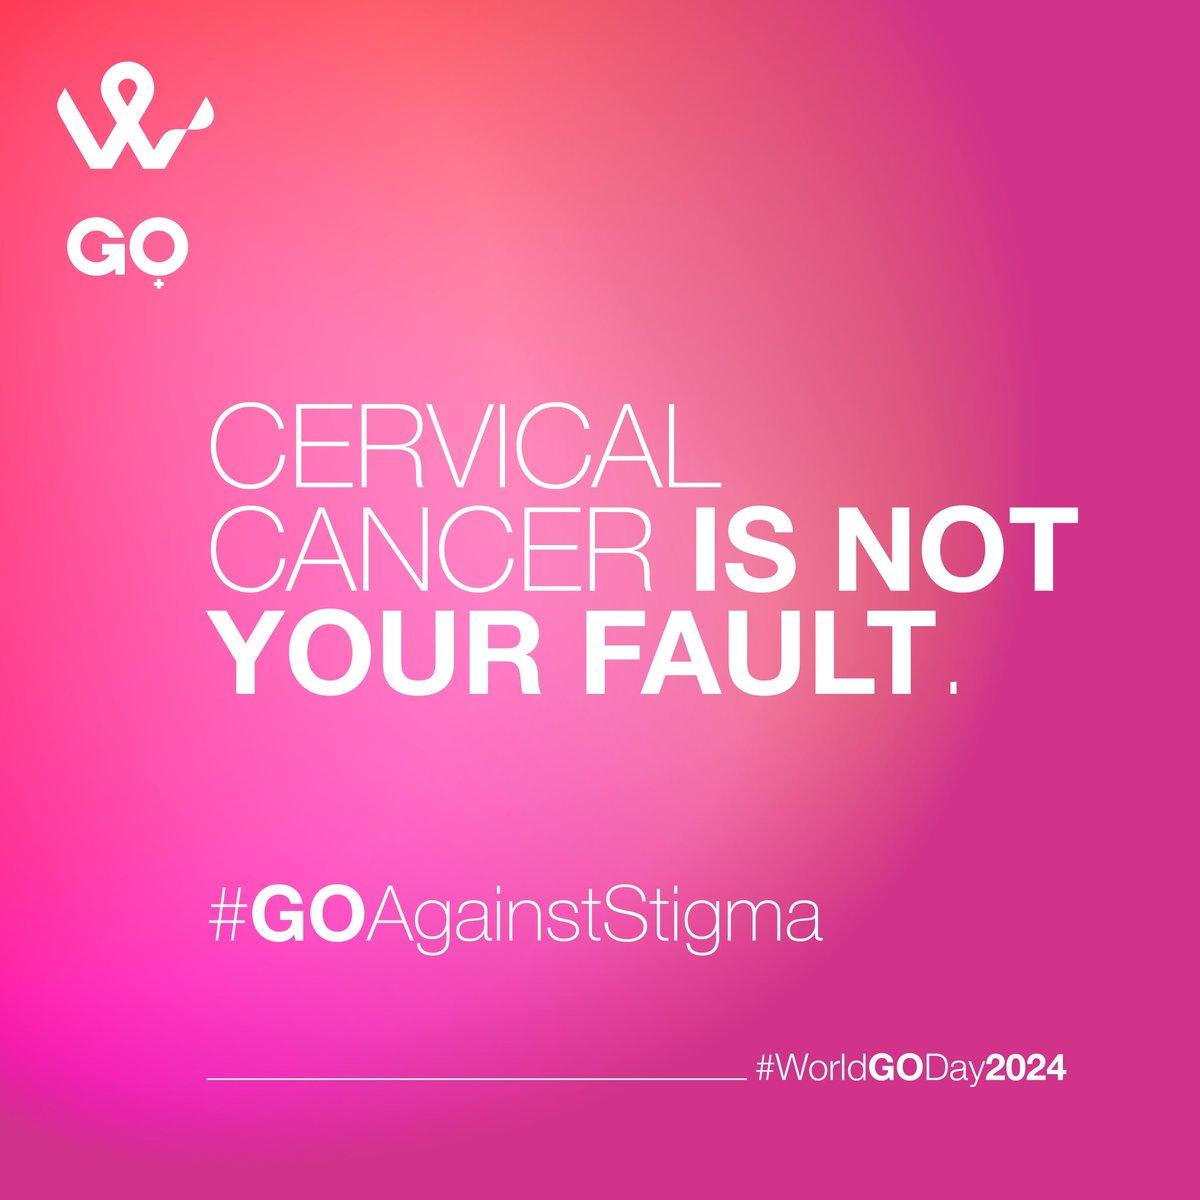 👎The bad news is some take it to mean cervical cancer is somehow the patient’s fault, which is unfair & untrue. HPV infections are extremely common & most don’t even notice when they have one. Let’s help lift the stigma. 🏋️ Cervical cancer is never your fault. #NoStigmainGO